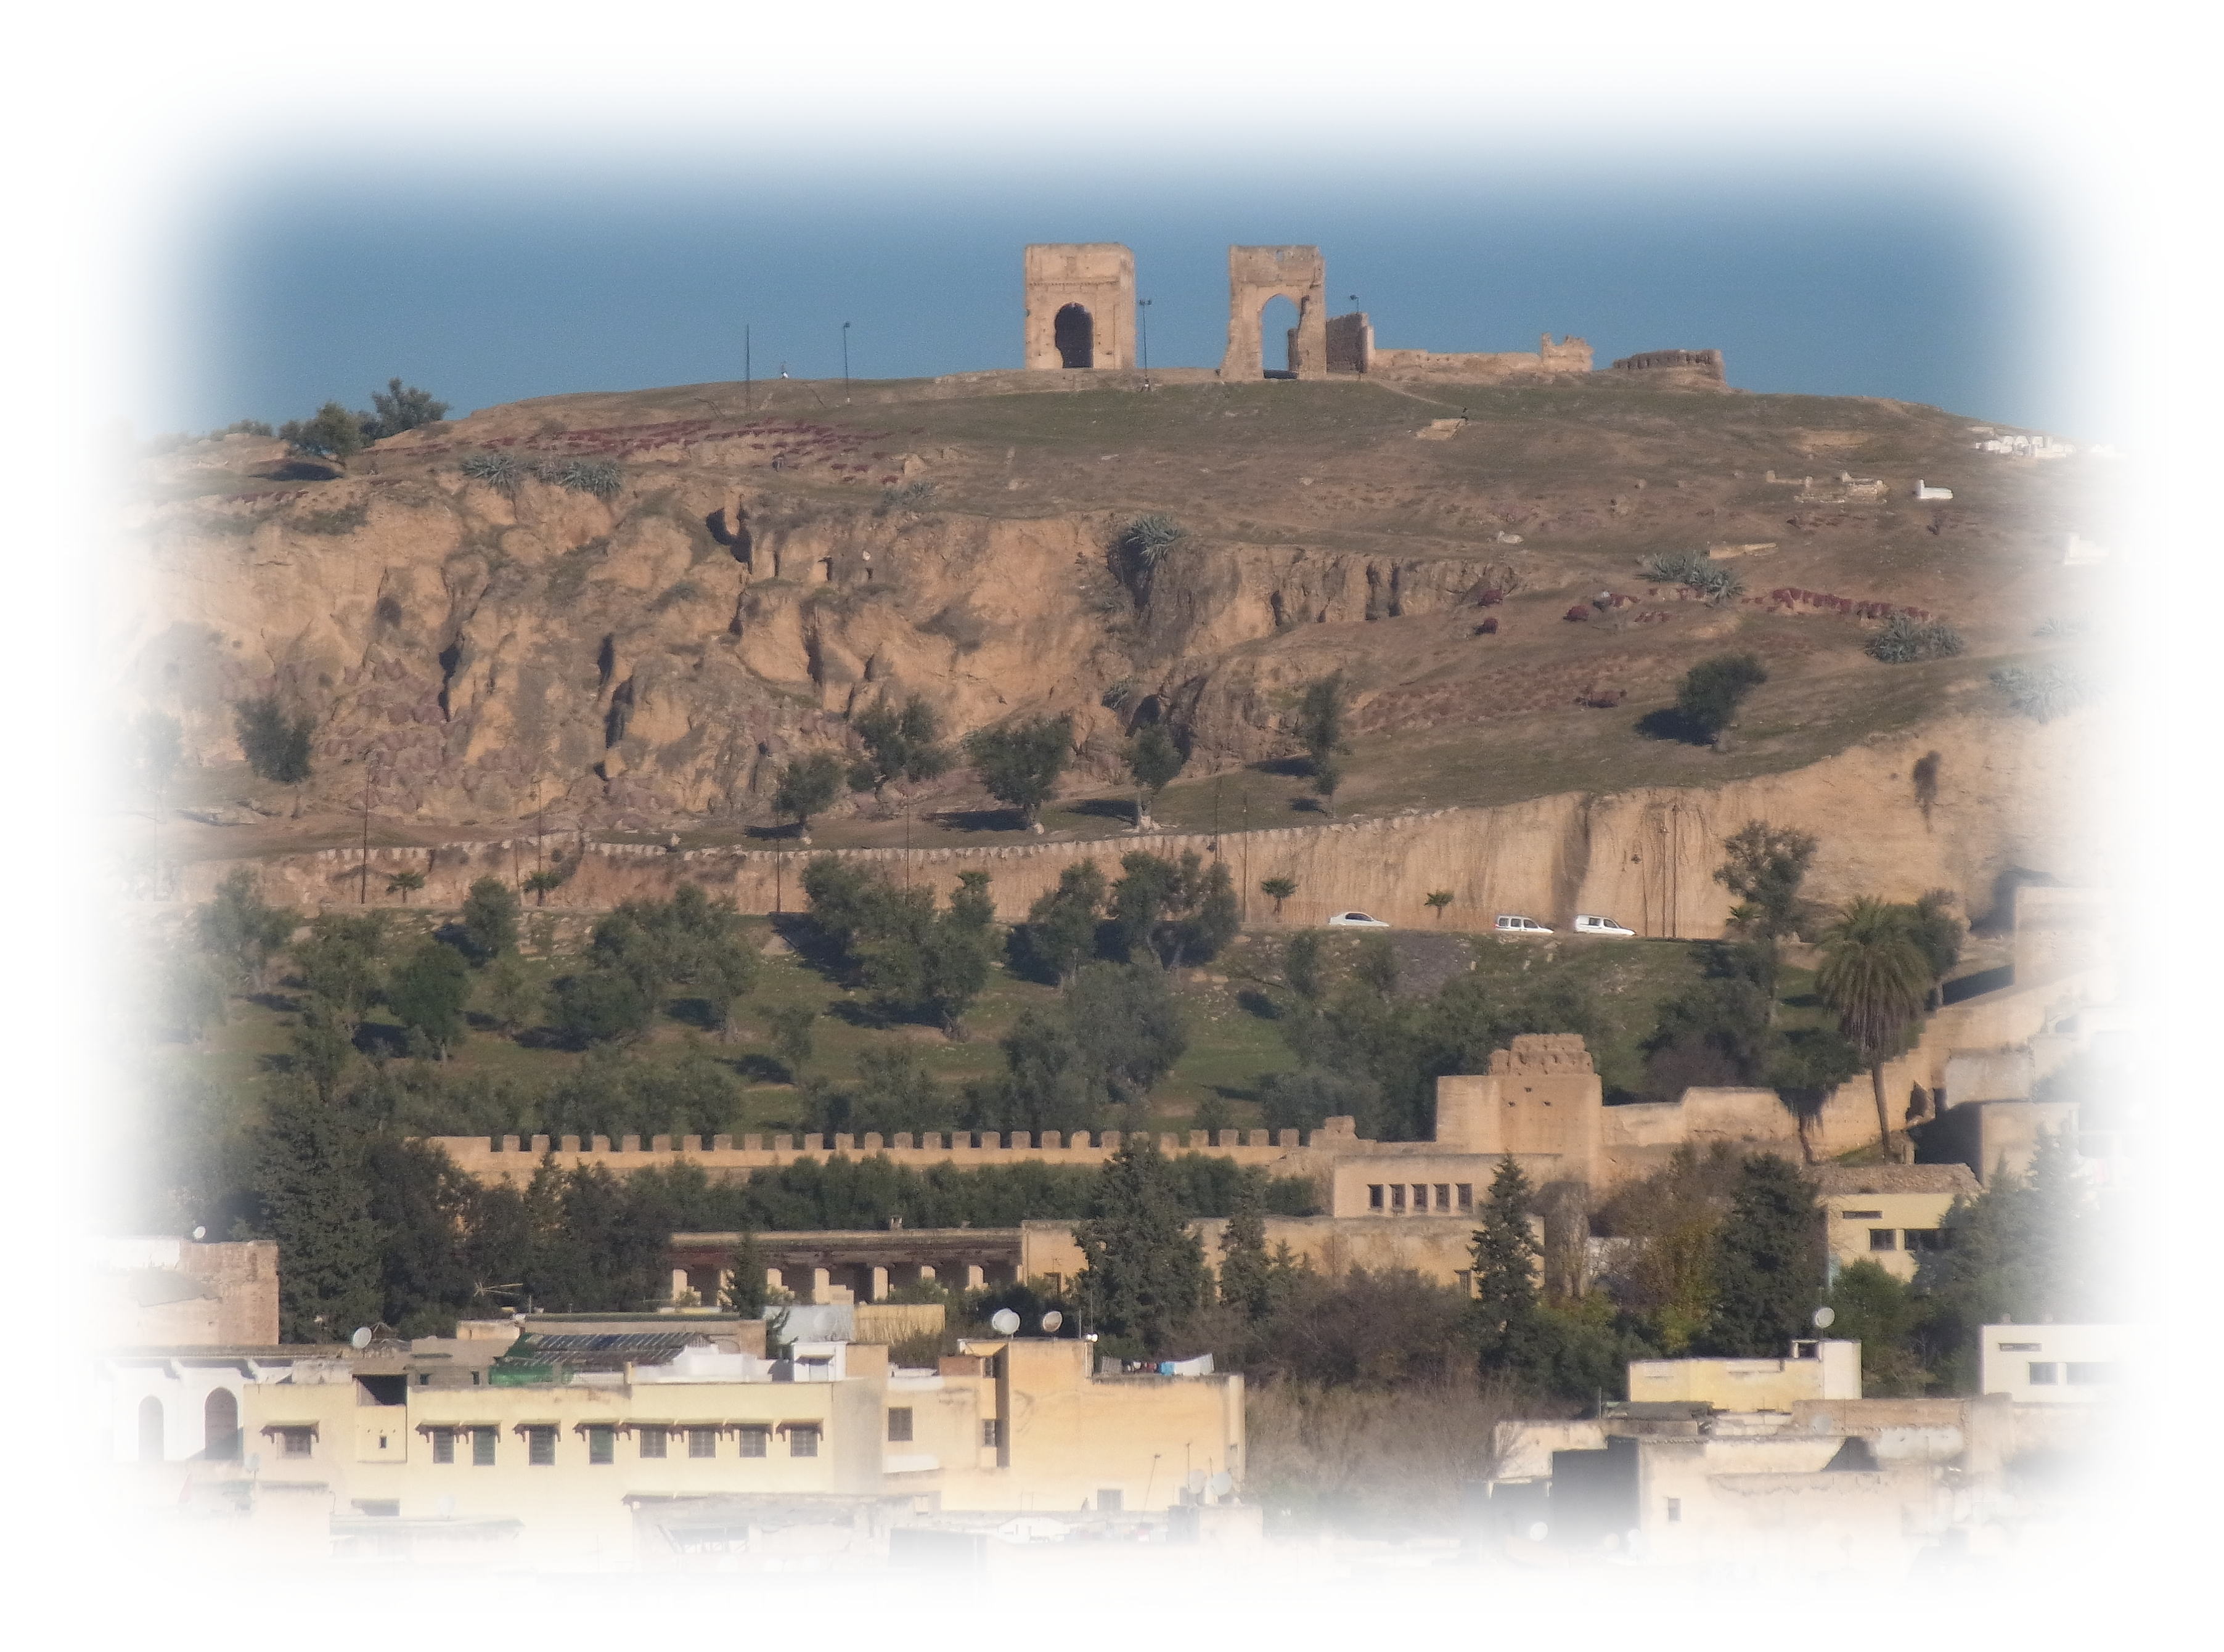 The ruins seen on the hill of Fes.